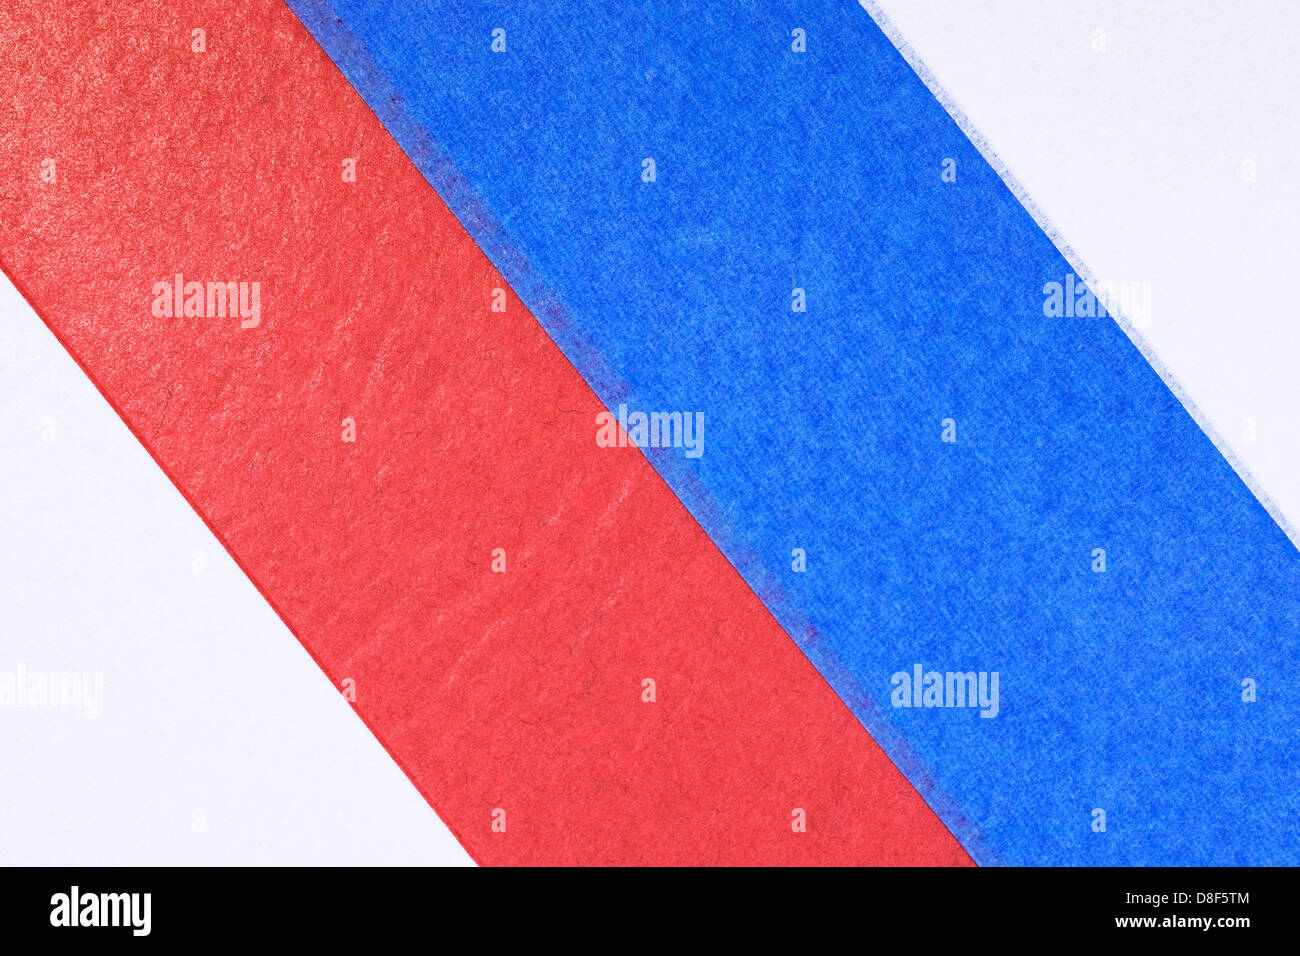 White, red and blue diagonal stripe pattern. Stock Photo